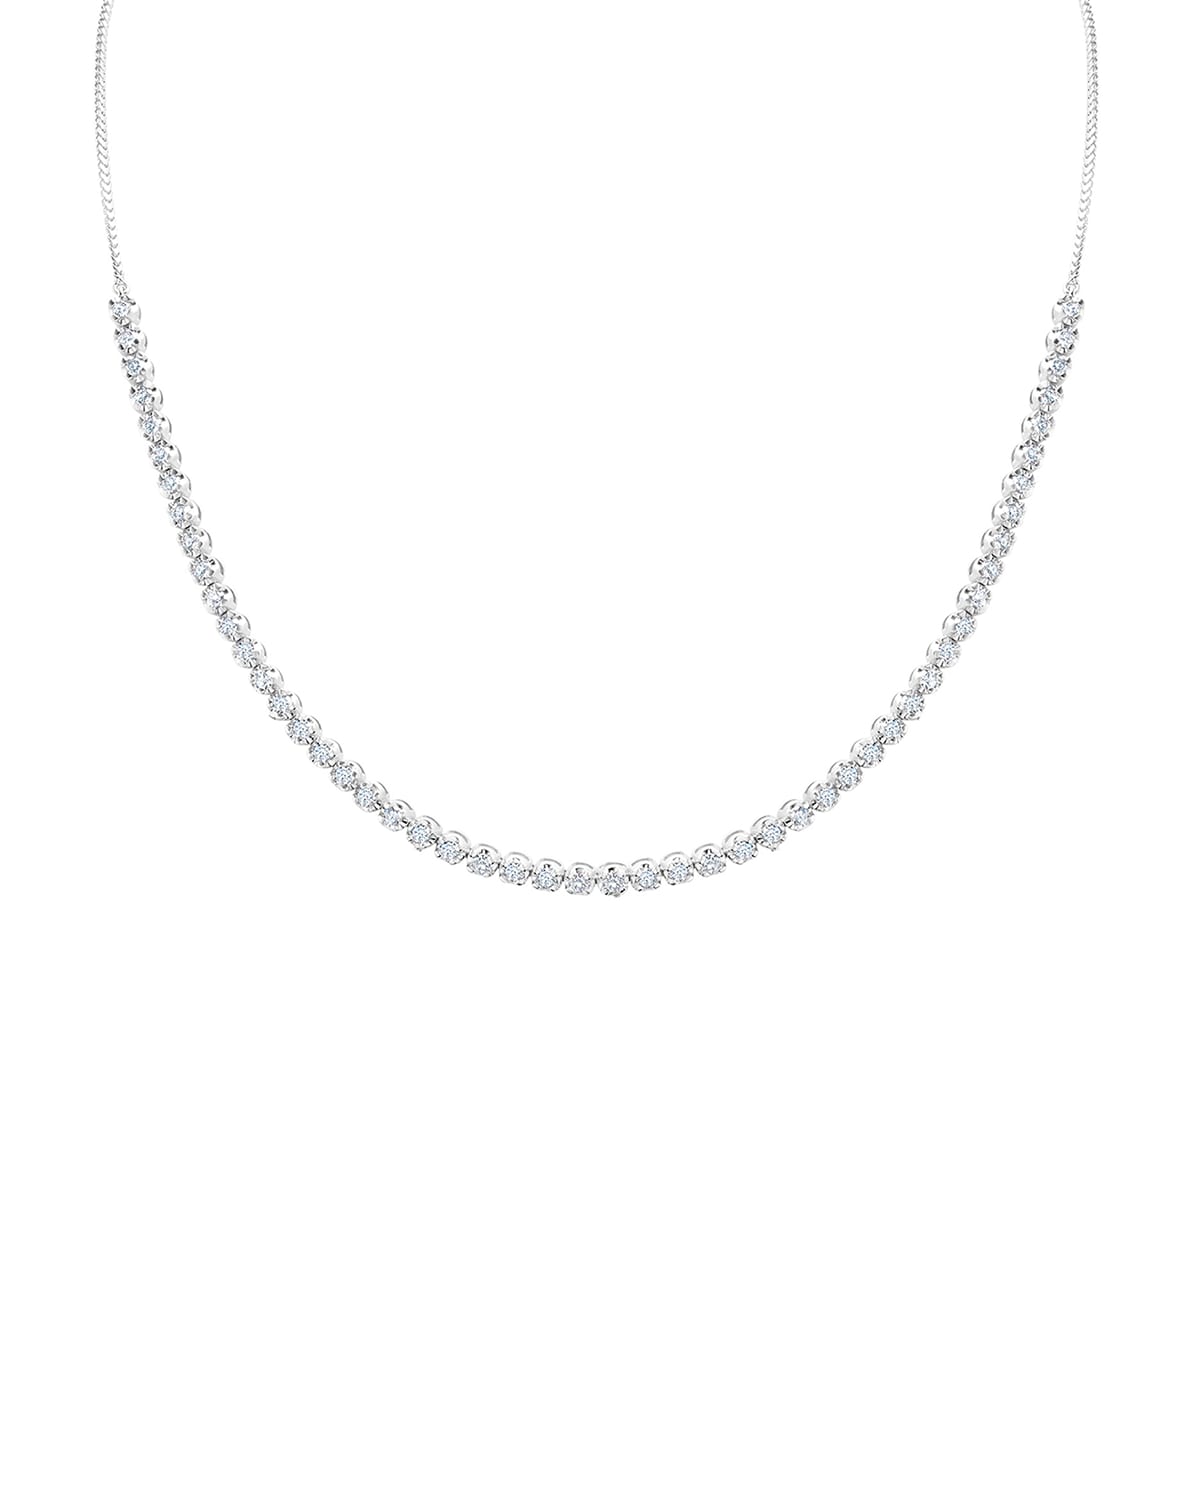 Natural Diamond Collar Necklace 18K White Gold Sterling Silver Jewelry